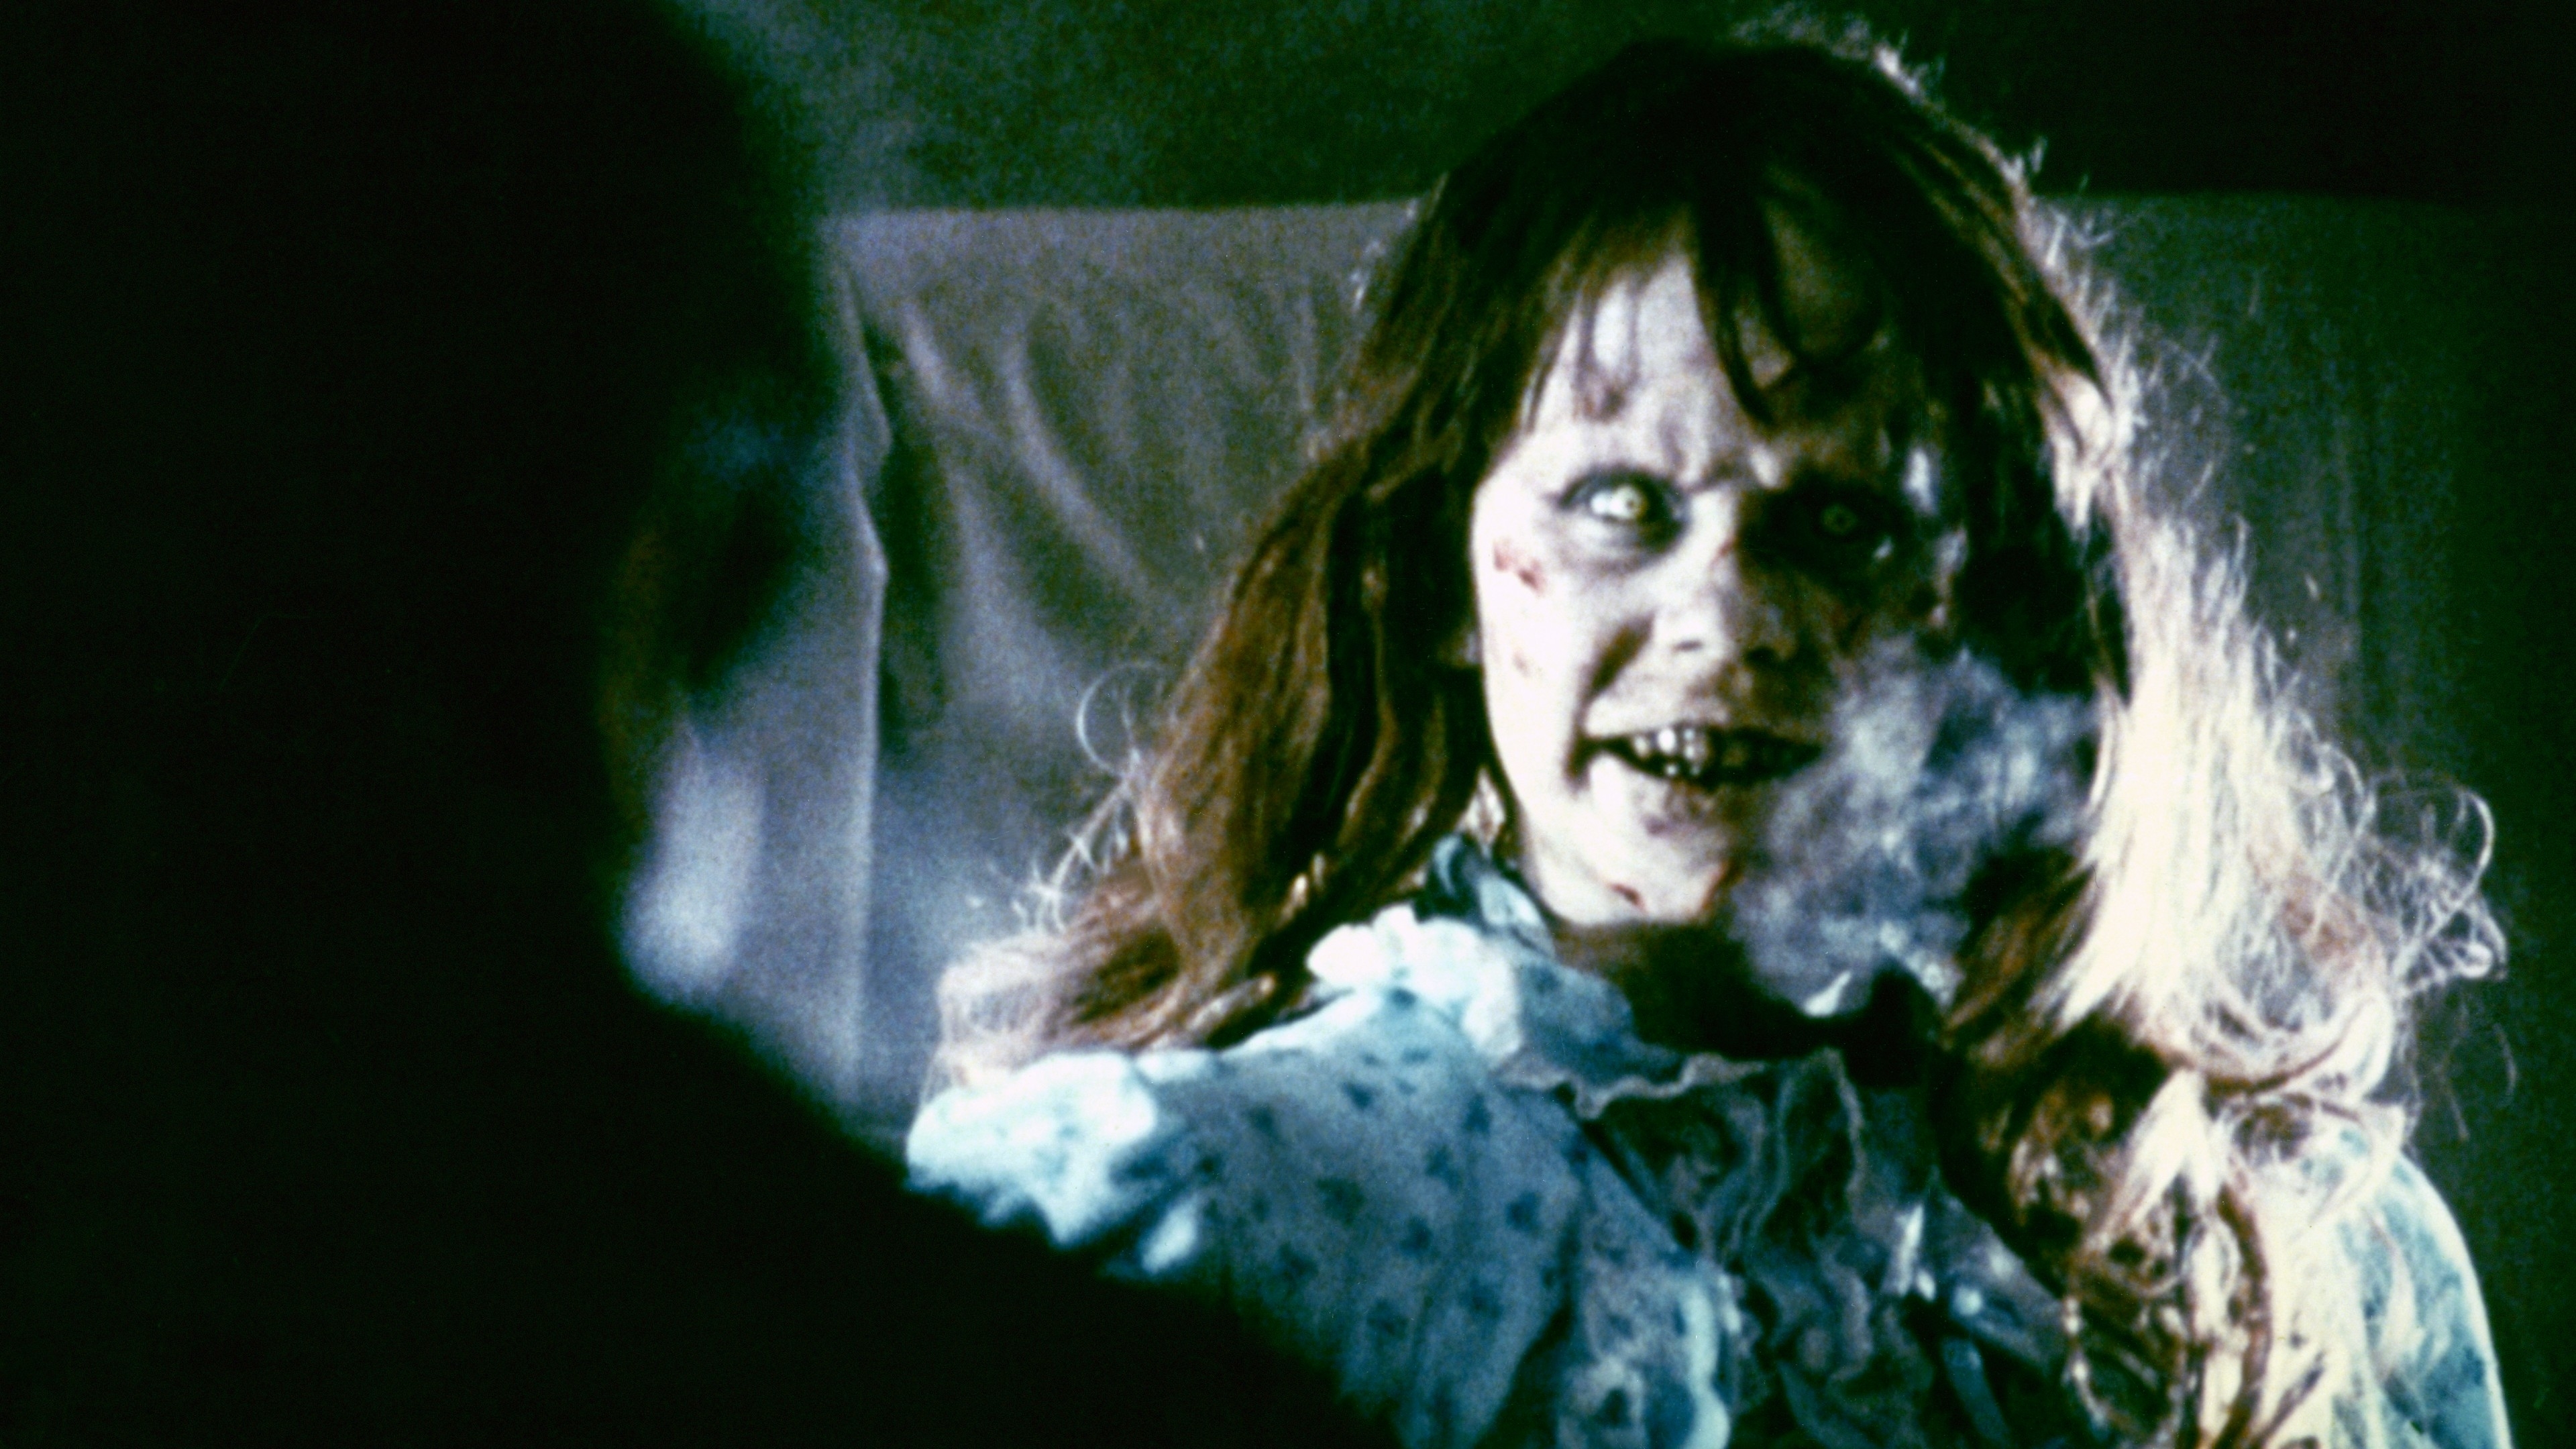 Character Regan from The Exorcist appears possessed in bed, facing an unseen figure